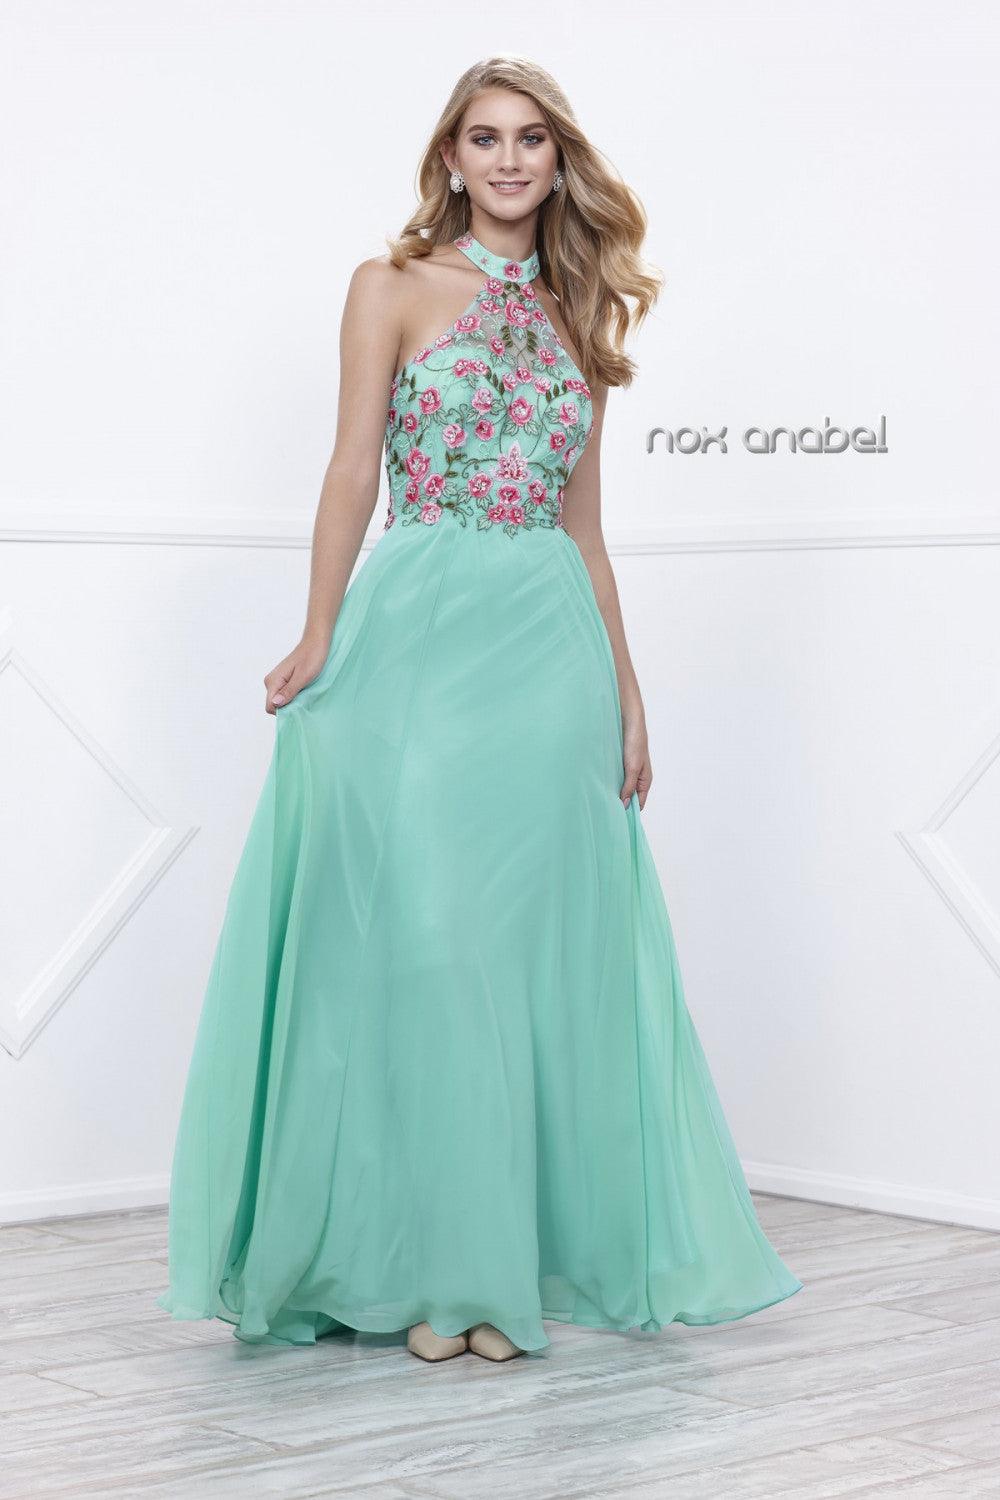 Long Halter Floral Bodice Formal Evening Gown - The Dress Outlet Nox Anabel